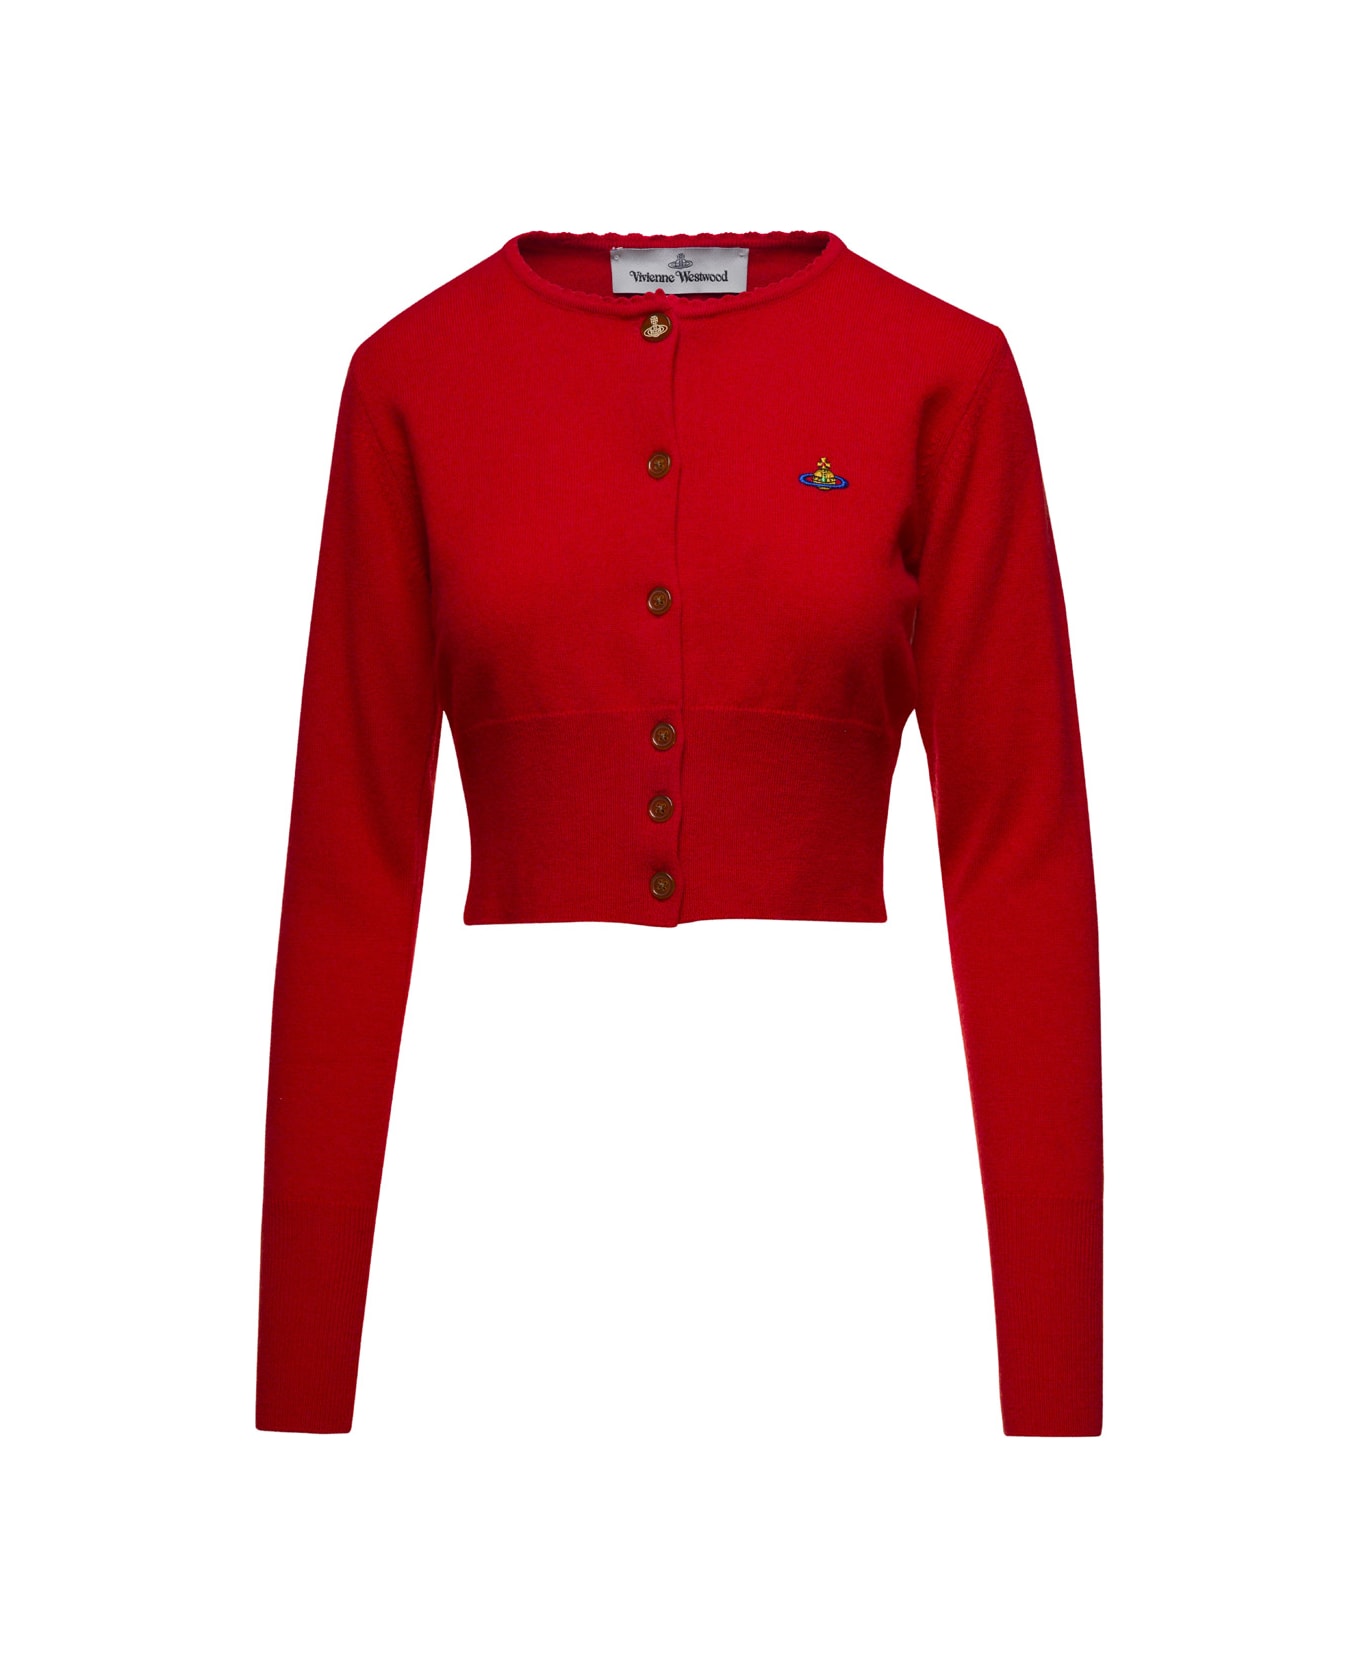 Vivienne Westwood Red Cardigan With Signature Embroidered Orb Logo In Cotton Woman - Red